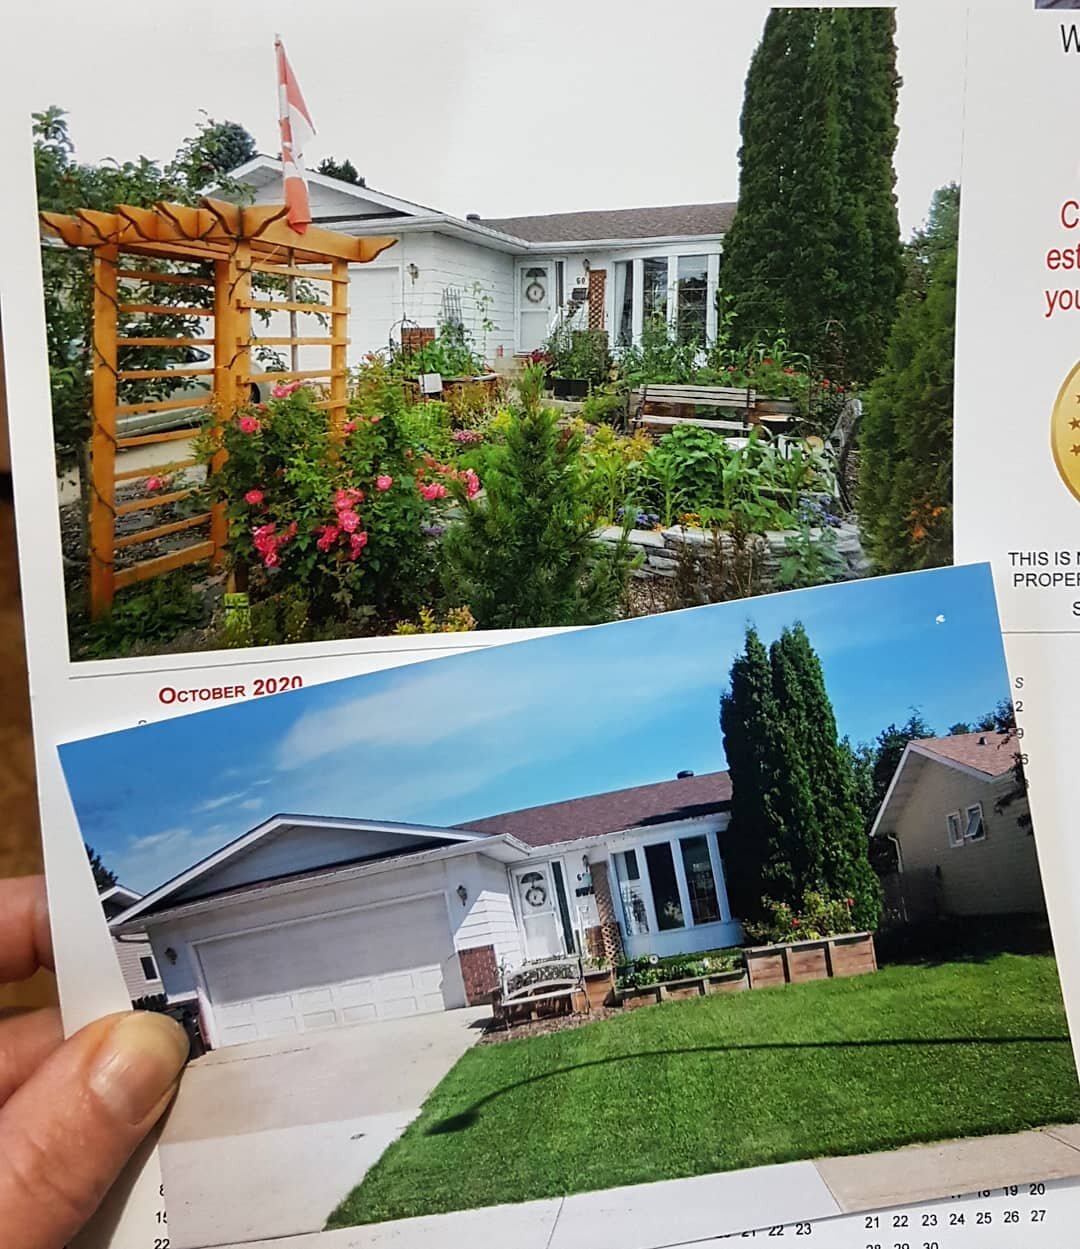 4 year difference. Thanks to our local realtors who give annual calendars with a pic of our house. The neighbours said the photographer was at it for a while to get the shot over the plants! It's not for sale.
From a monoculture grass scape... to a l